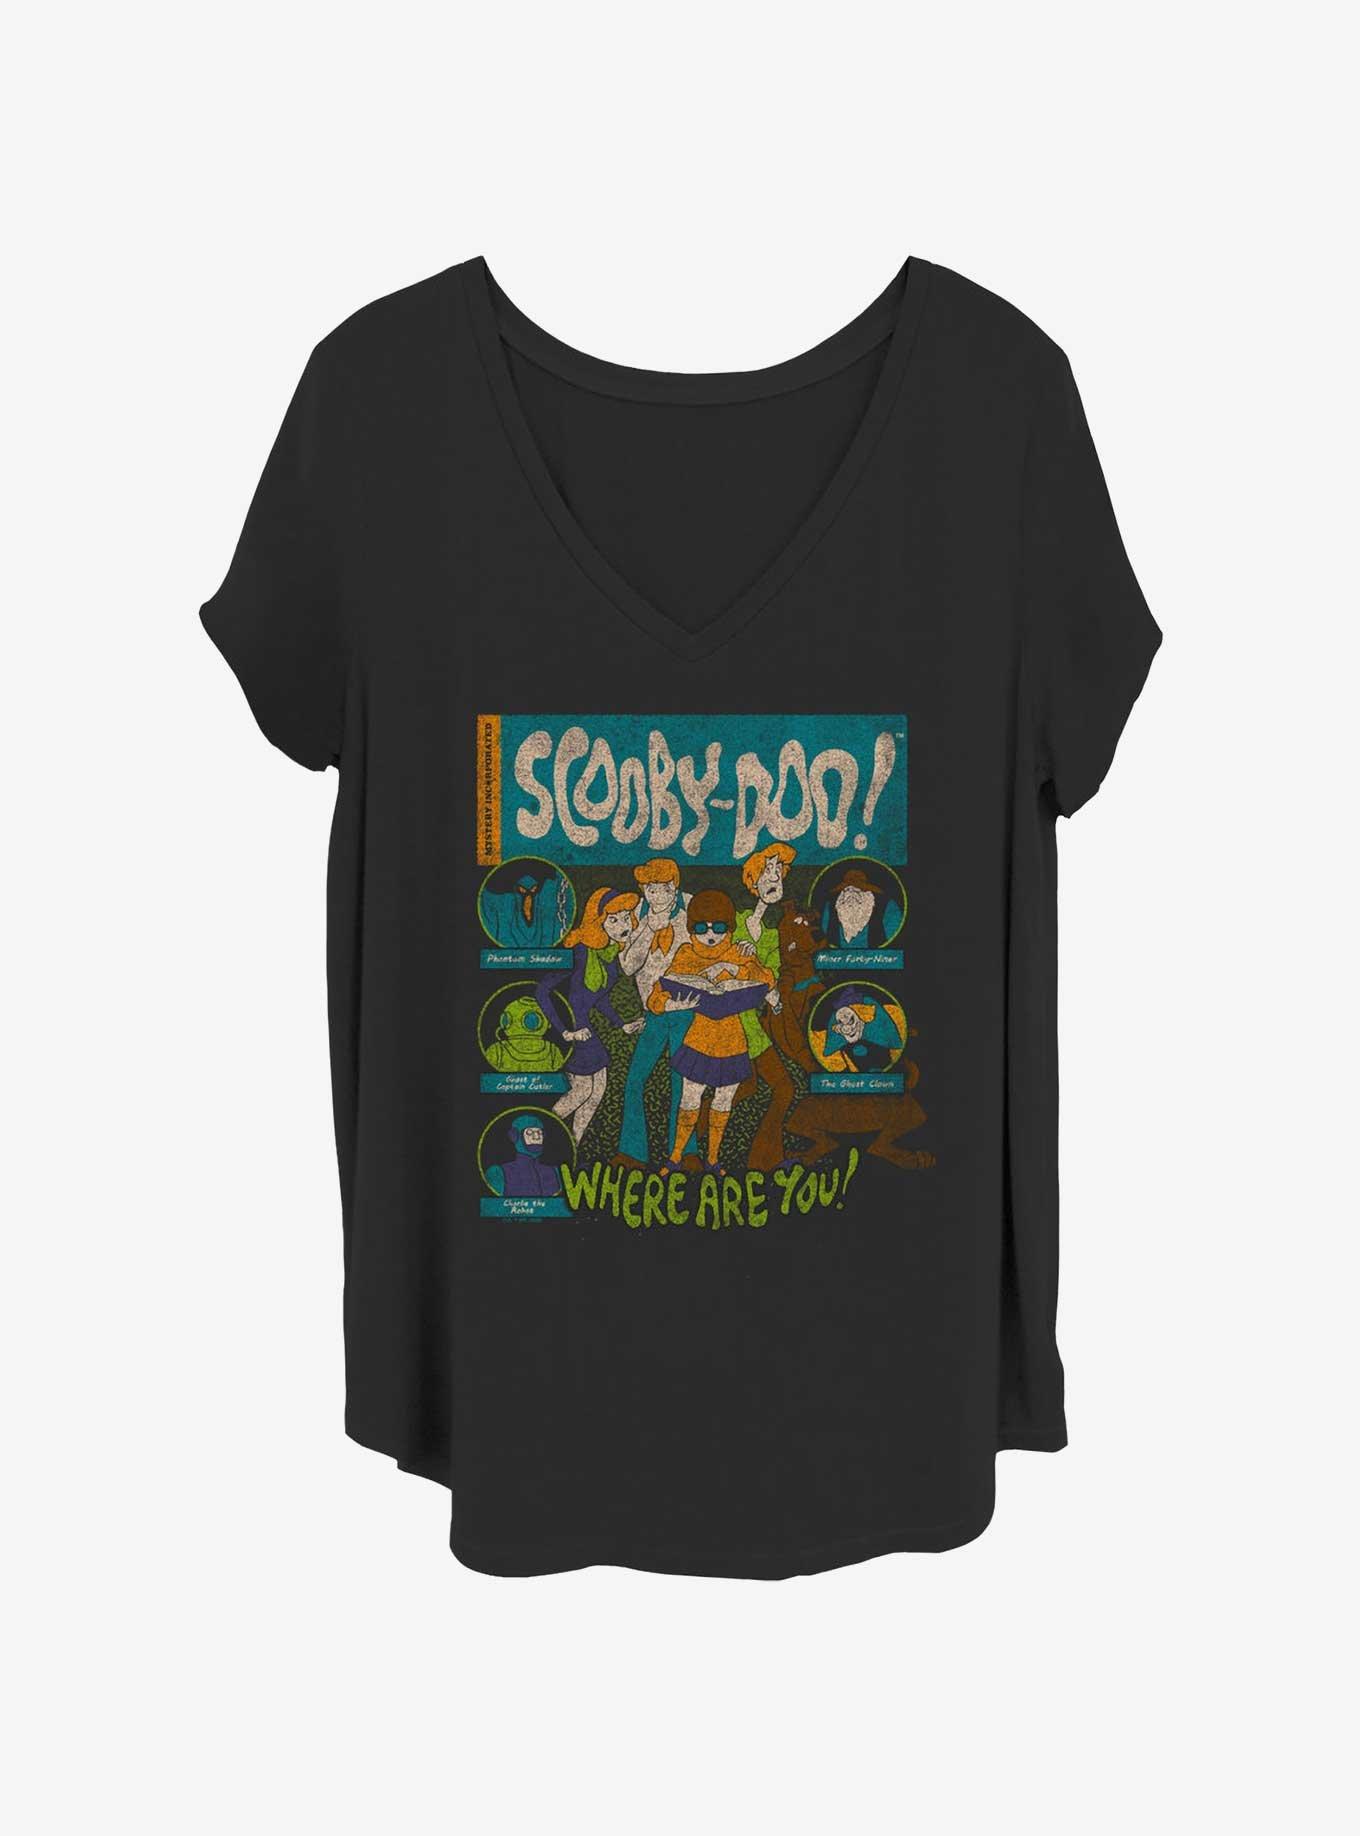 Scooby-Doo Mystery Poster Girls T-Shirt Plus